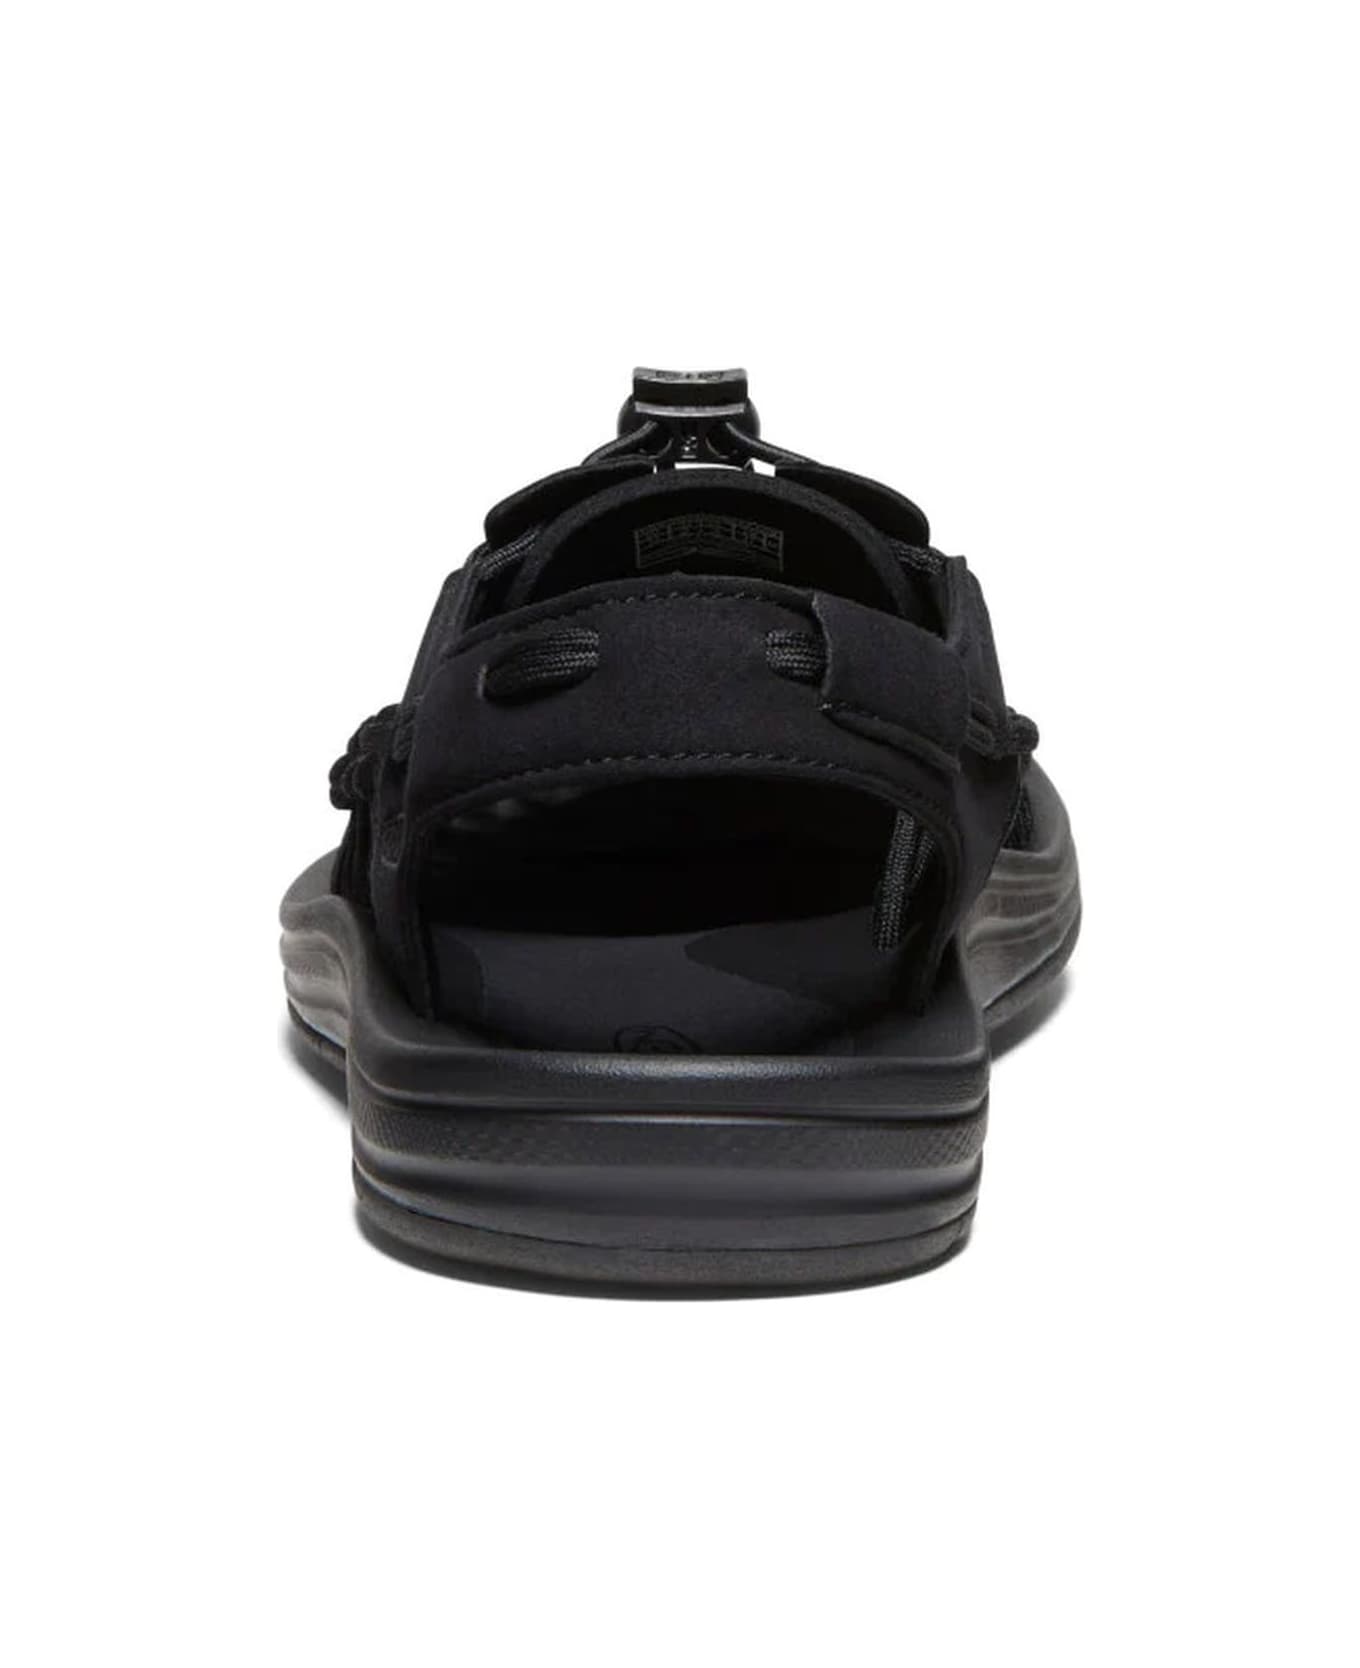 Keen Black Two-cord Construction Sandals - Nero その他各種シューズ